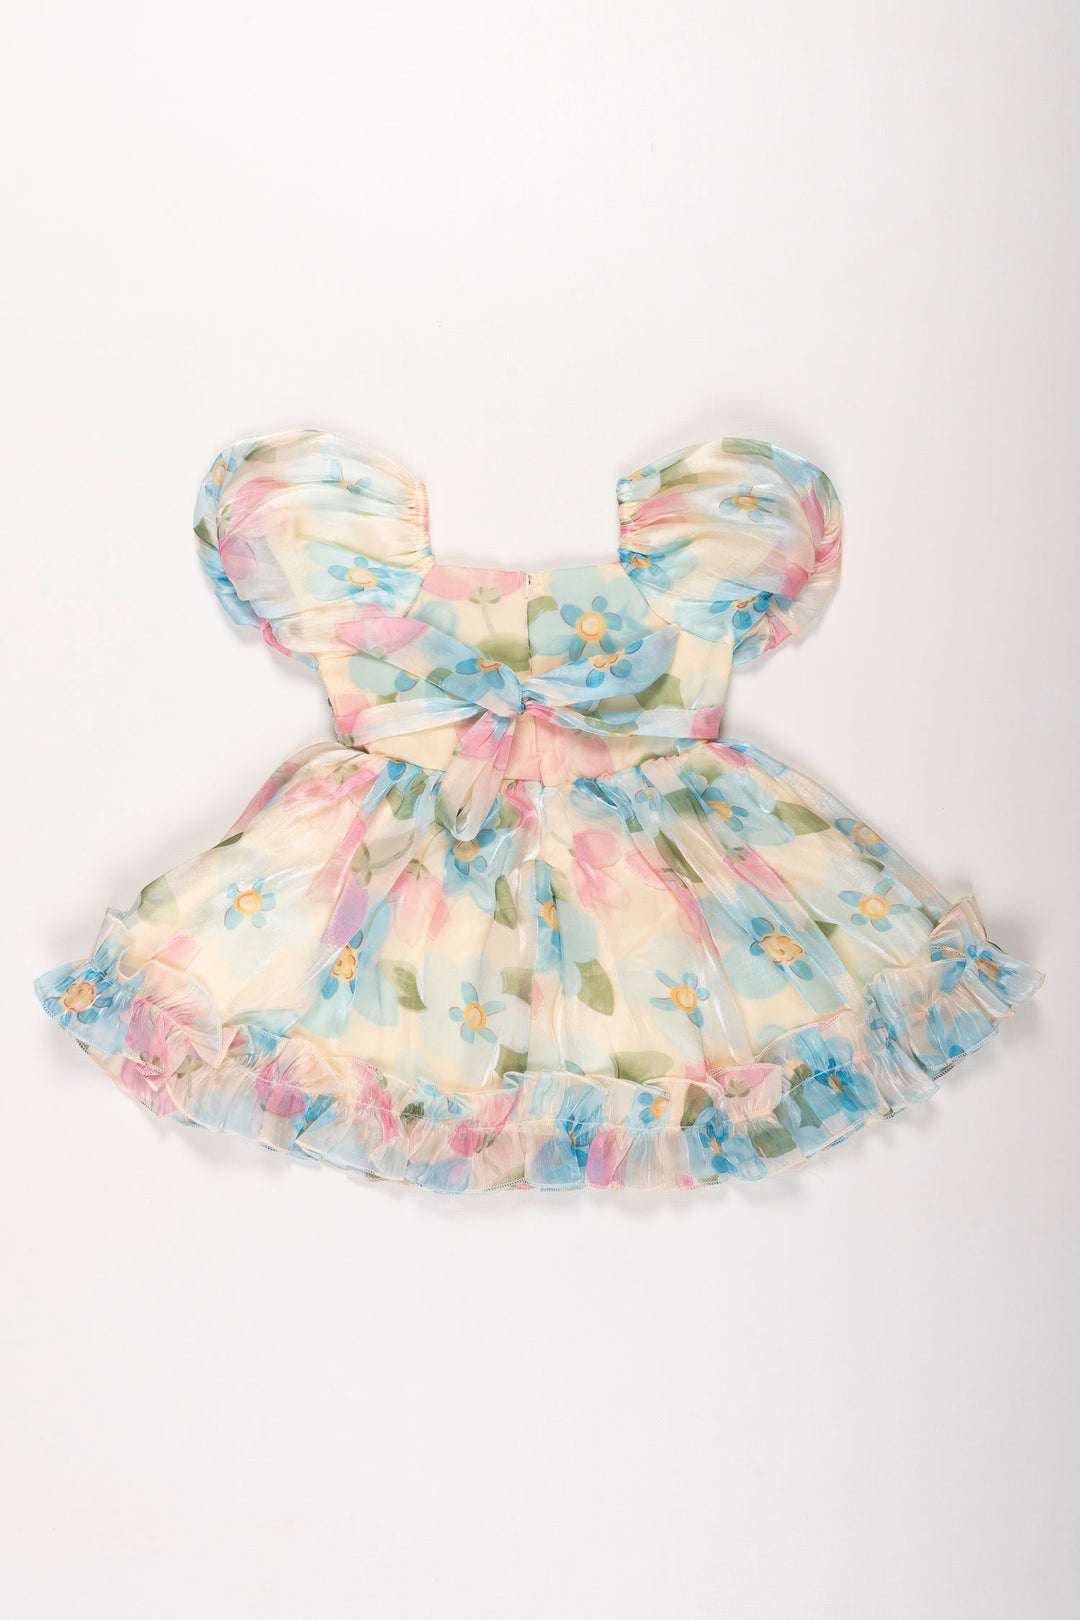 The Nesavu Girls Fancy Party Frock Girls Enchanted Blossom Organza Party Frock - Whimsical Floral Elegance Nesavu Whimsical Floral Organza Frock for Girls | Perfect Party Wear | The Nesavu